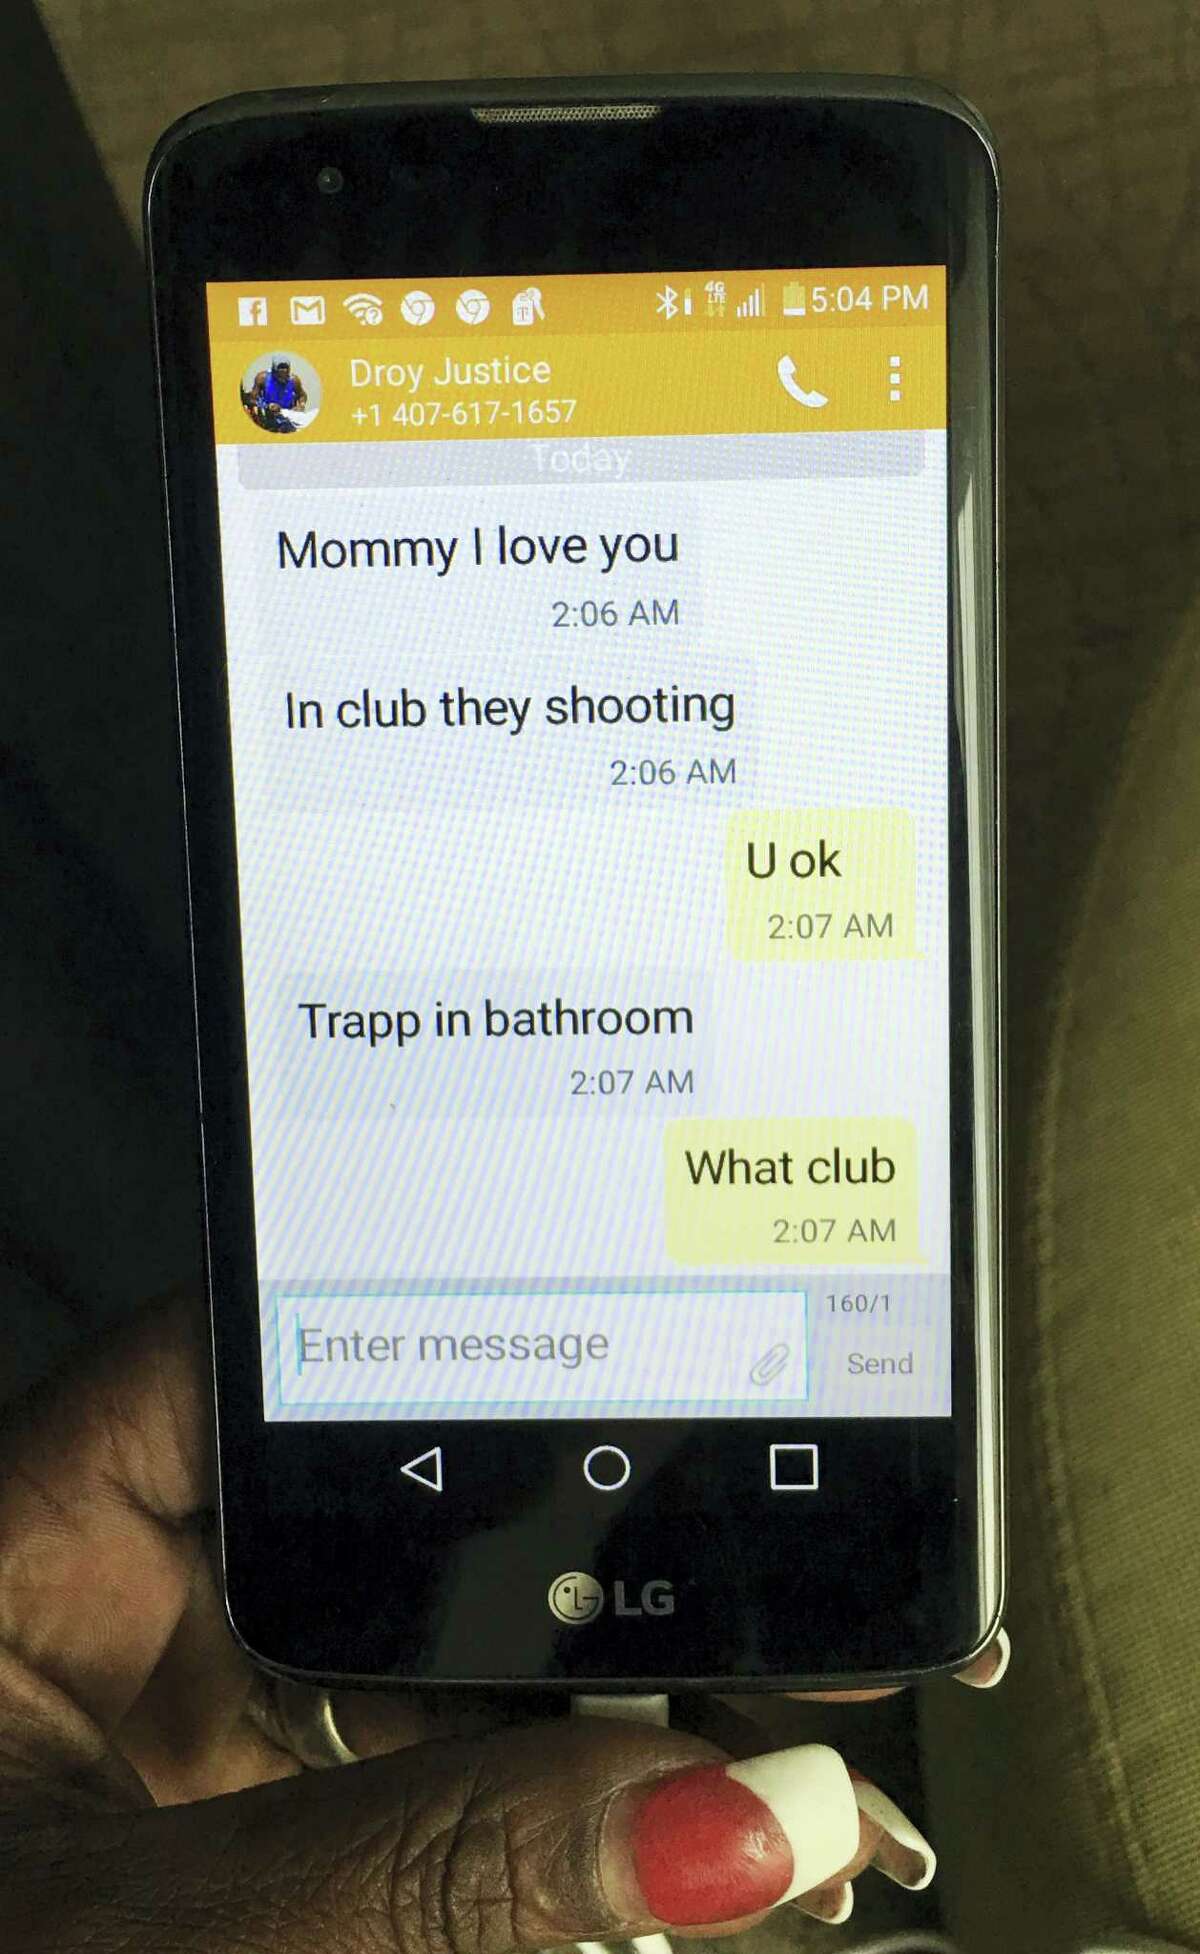 Mina Justice shows a text she received from her son Eddie Justice at Pulse nightclub during a fatal shooting in Orlando, Fla. on June 12, 2016. Justice hasn’t heard from her son since the messages.